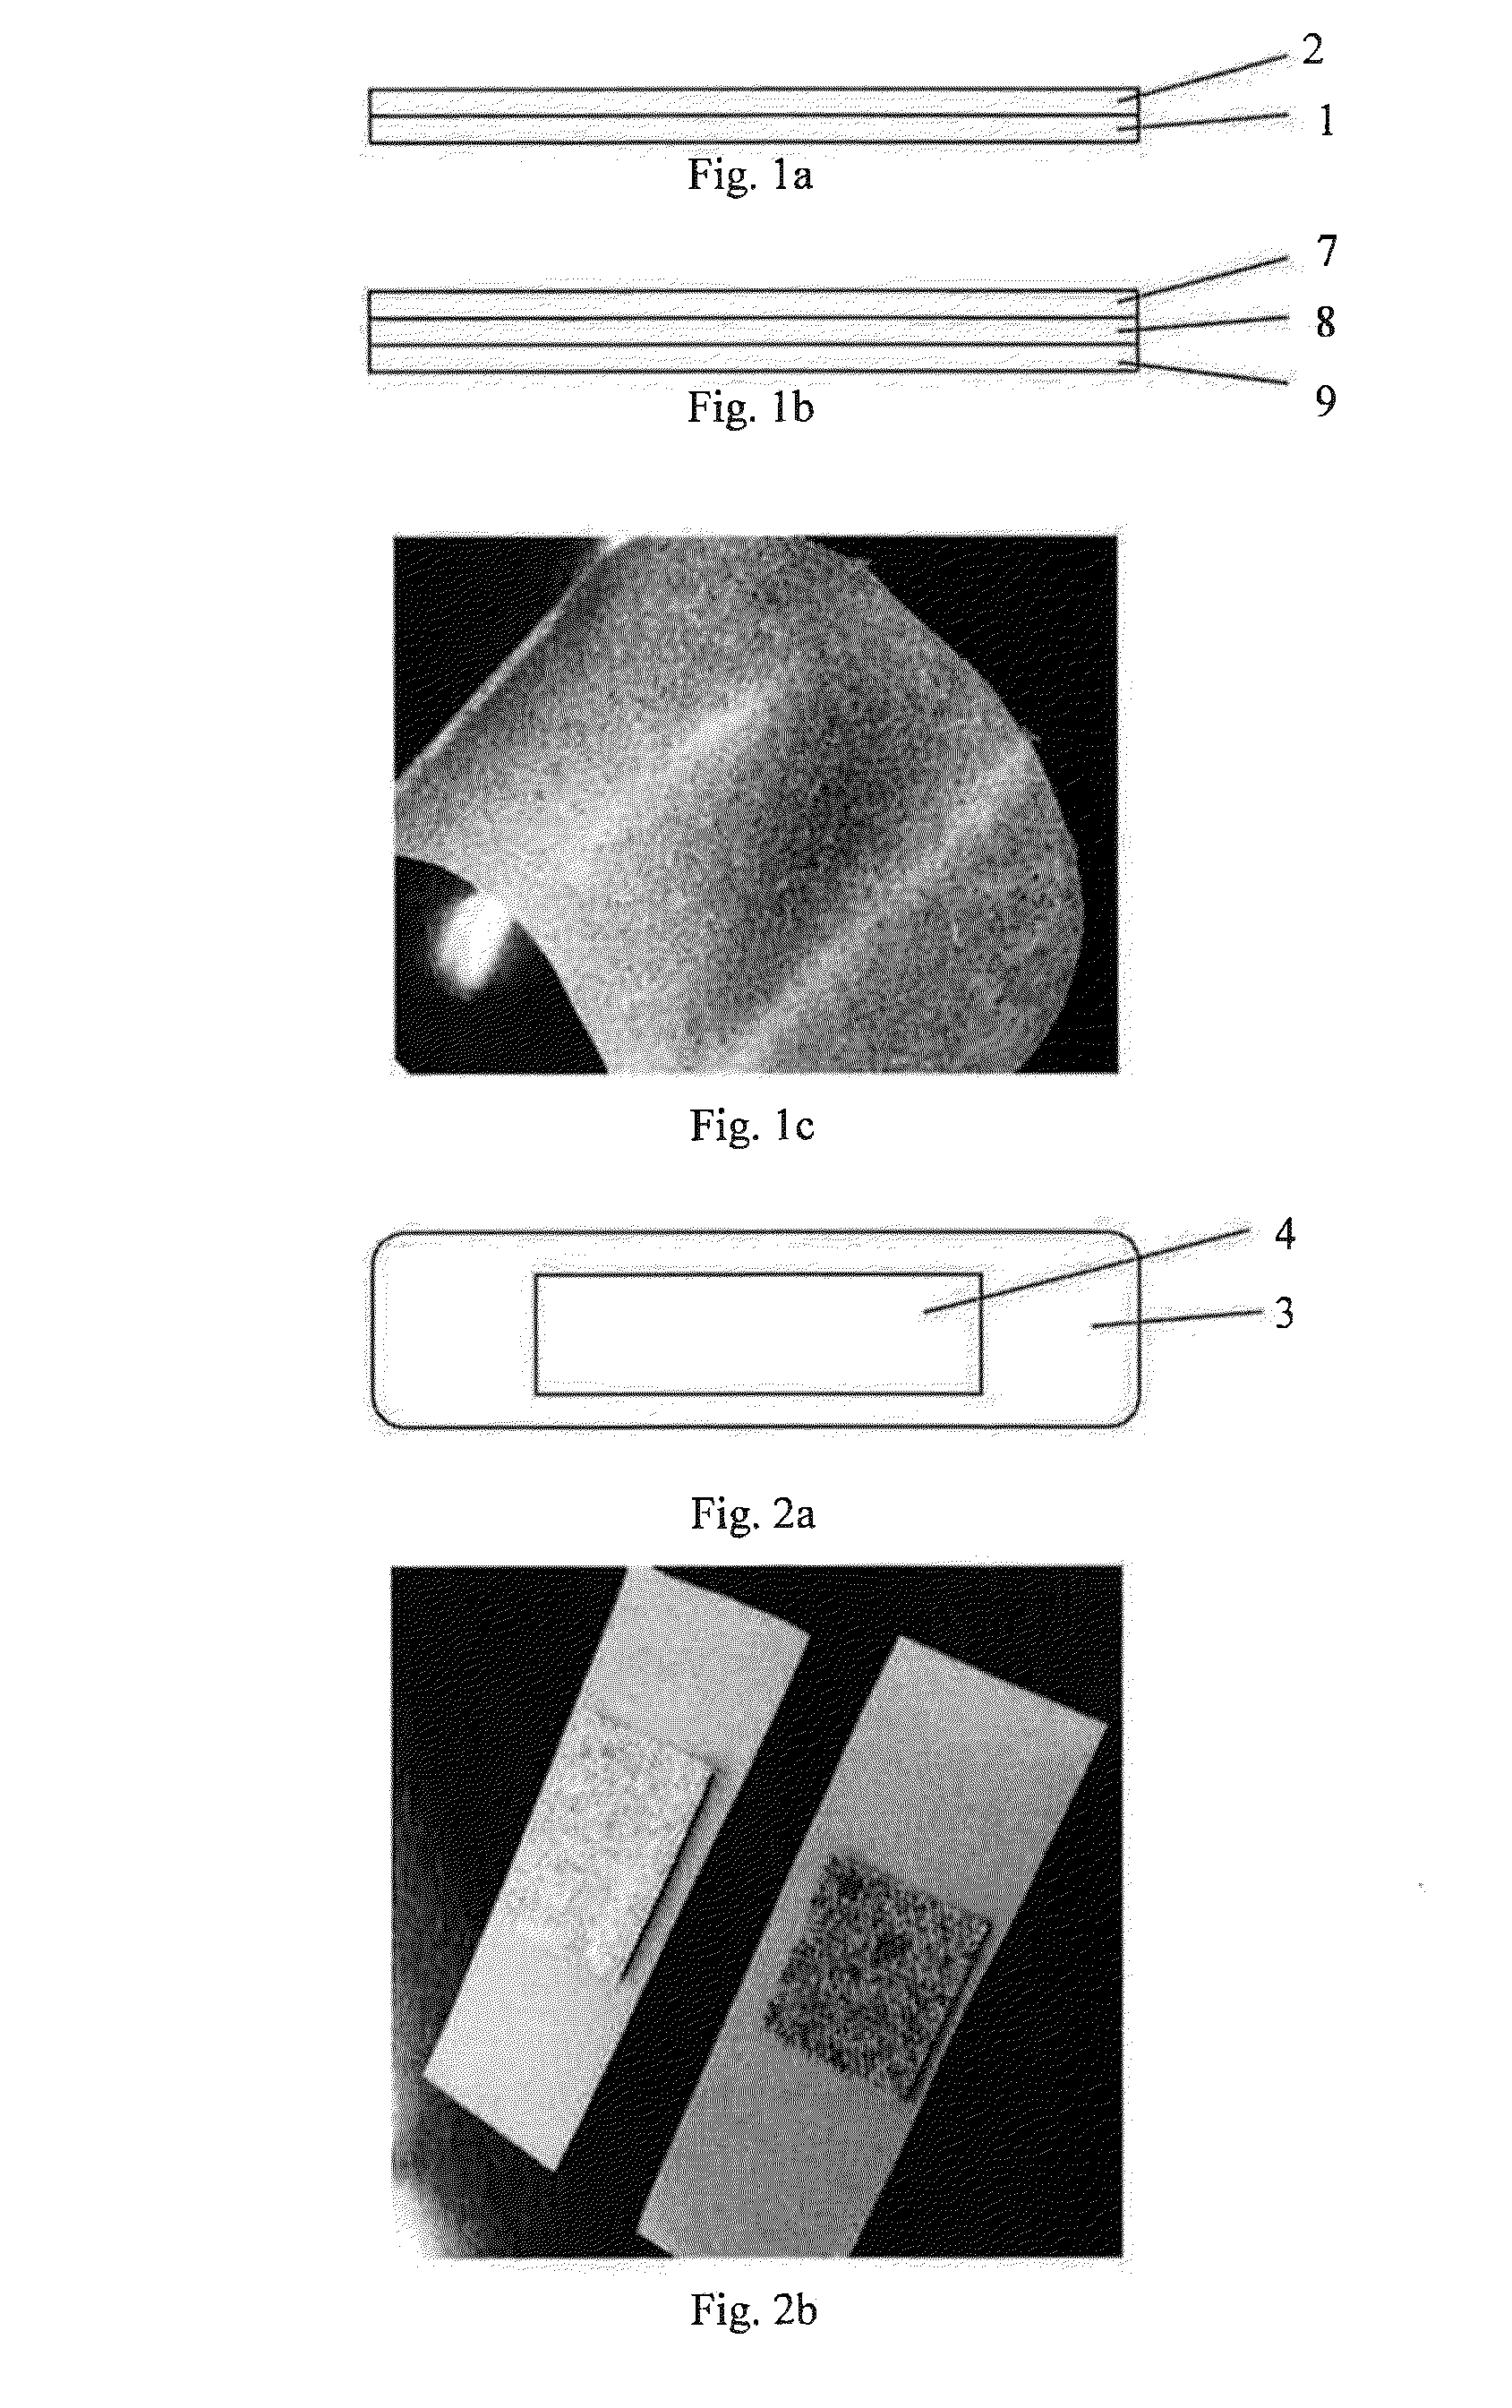 Product Comprising a Plant for Medicinal, Cosmetic, Coloring or Dermatologic Use